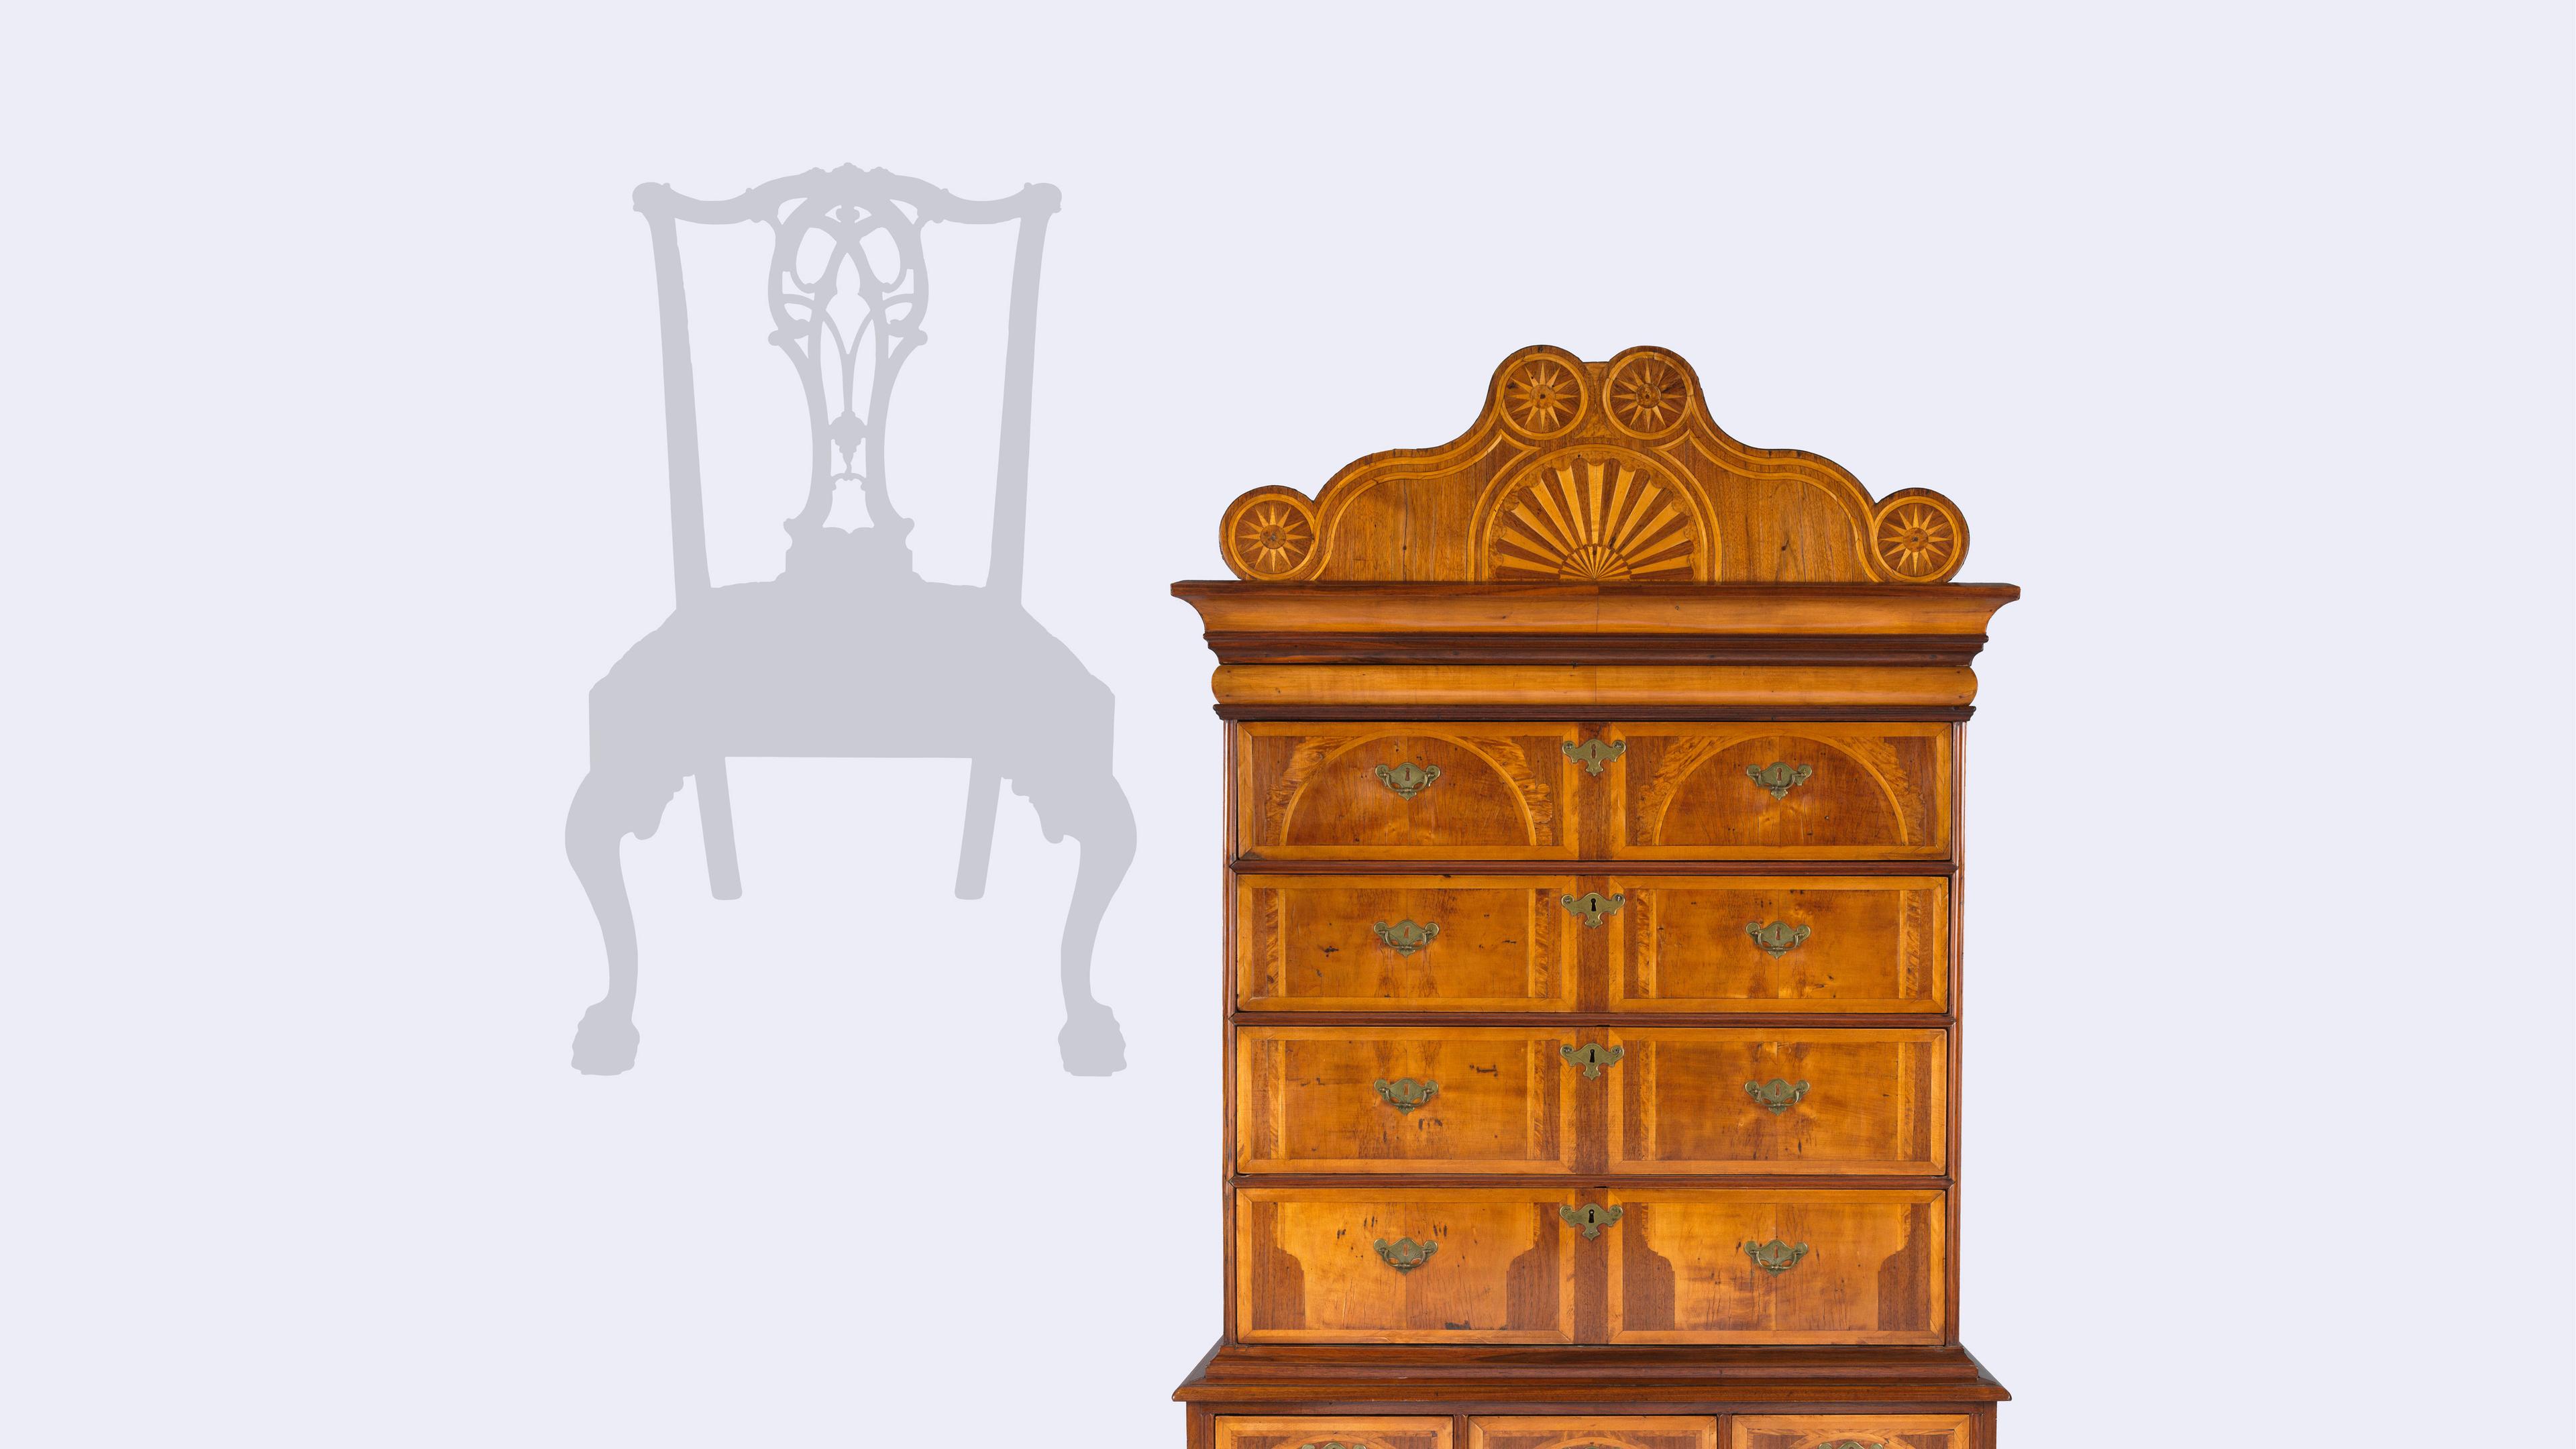 Classic outline of wood chair, beside wood dresser